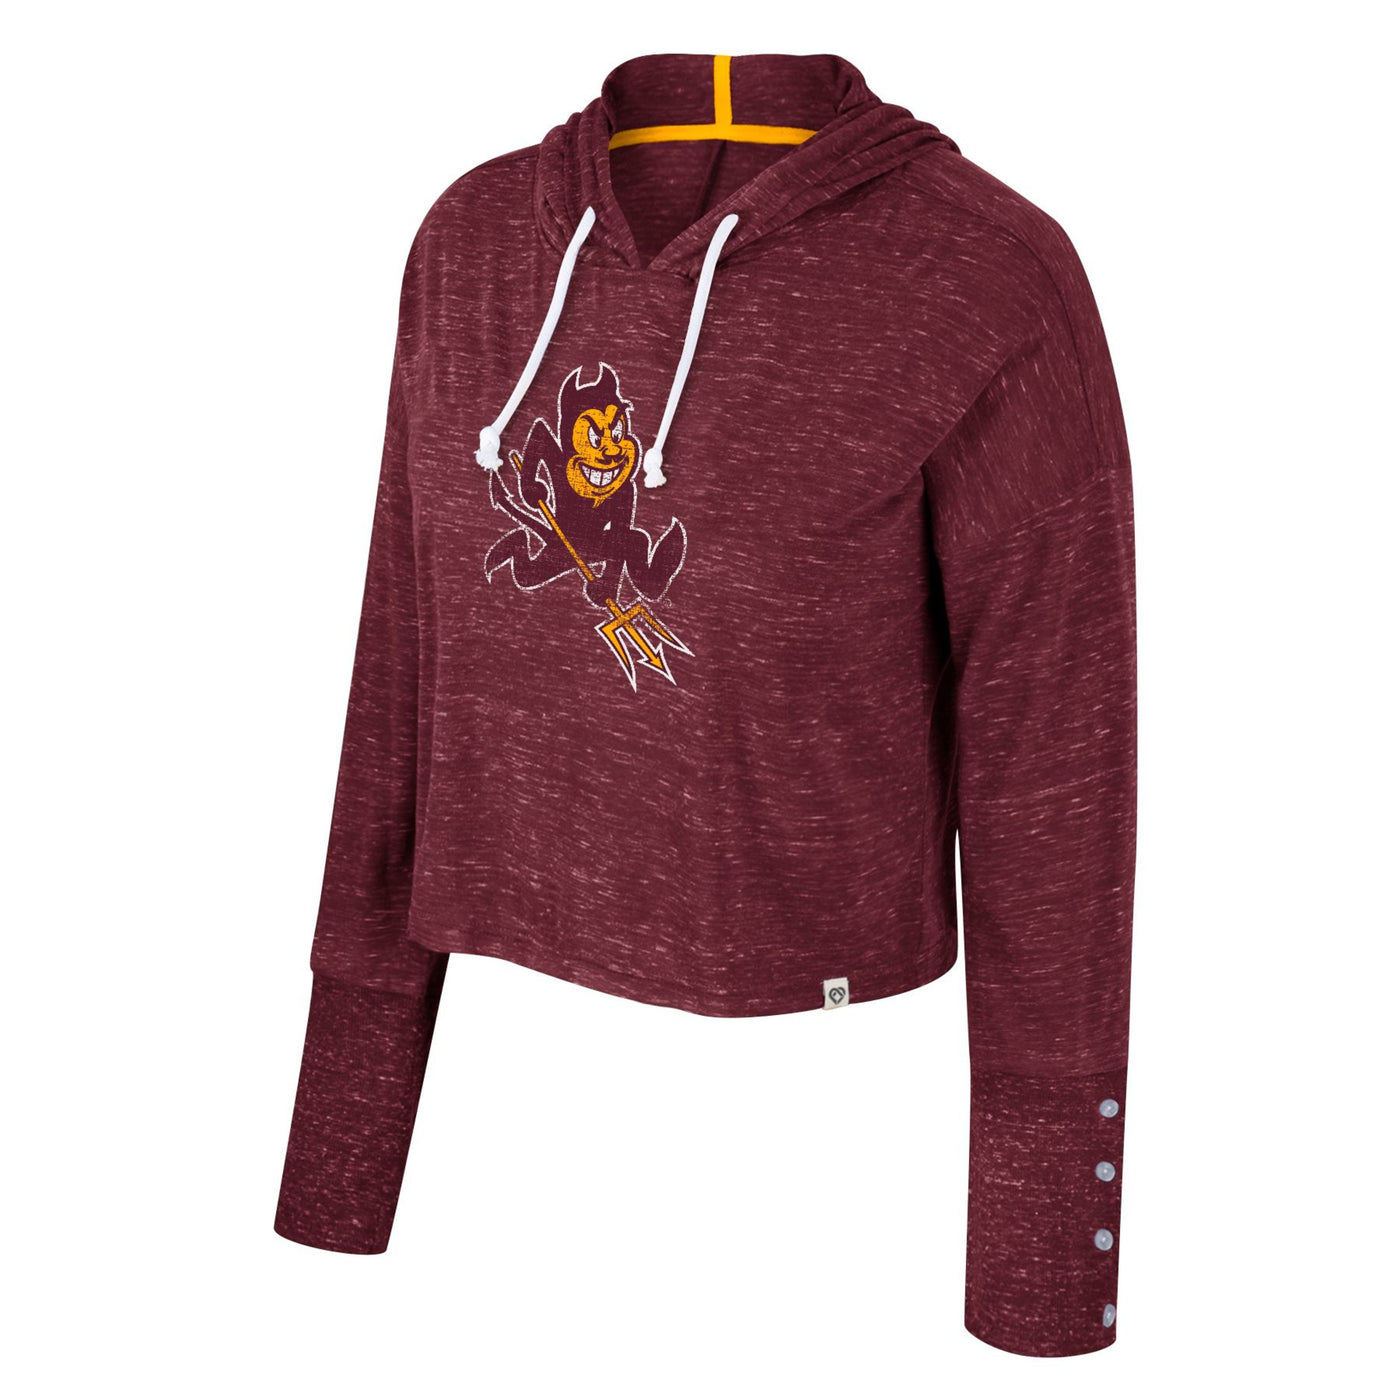 ASU maroon hooded longsleeve crop top. A distressed sparky mascot on the front. clear buttons on the sleeve by the wrist and white drawstrings for the hood.